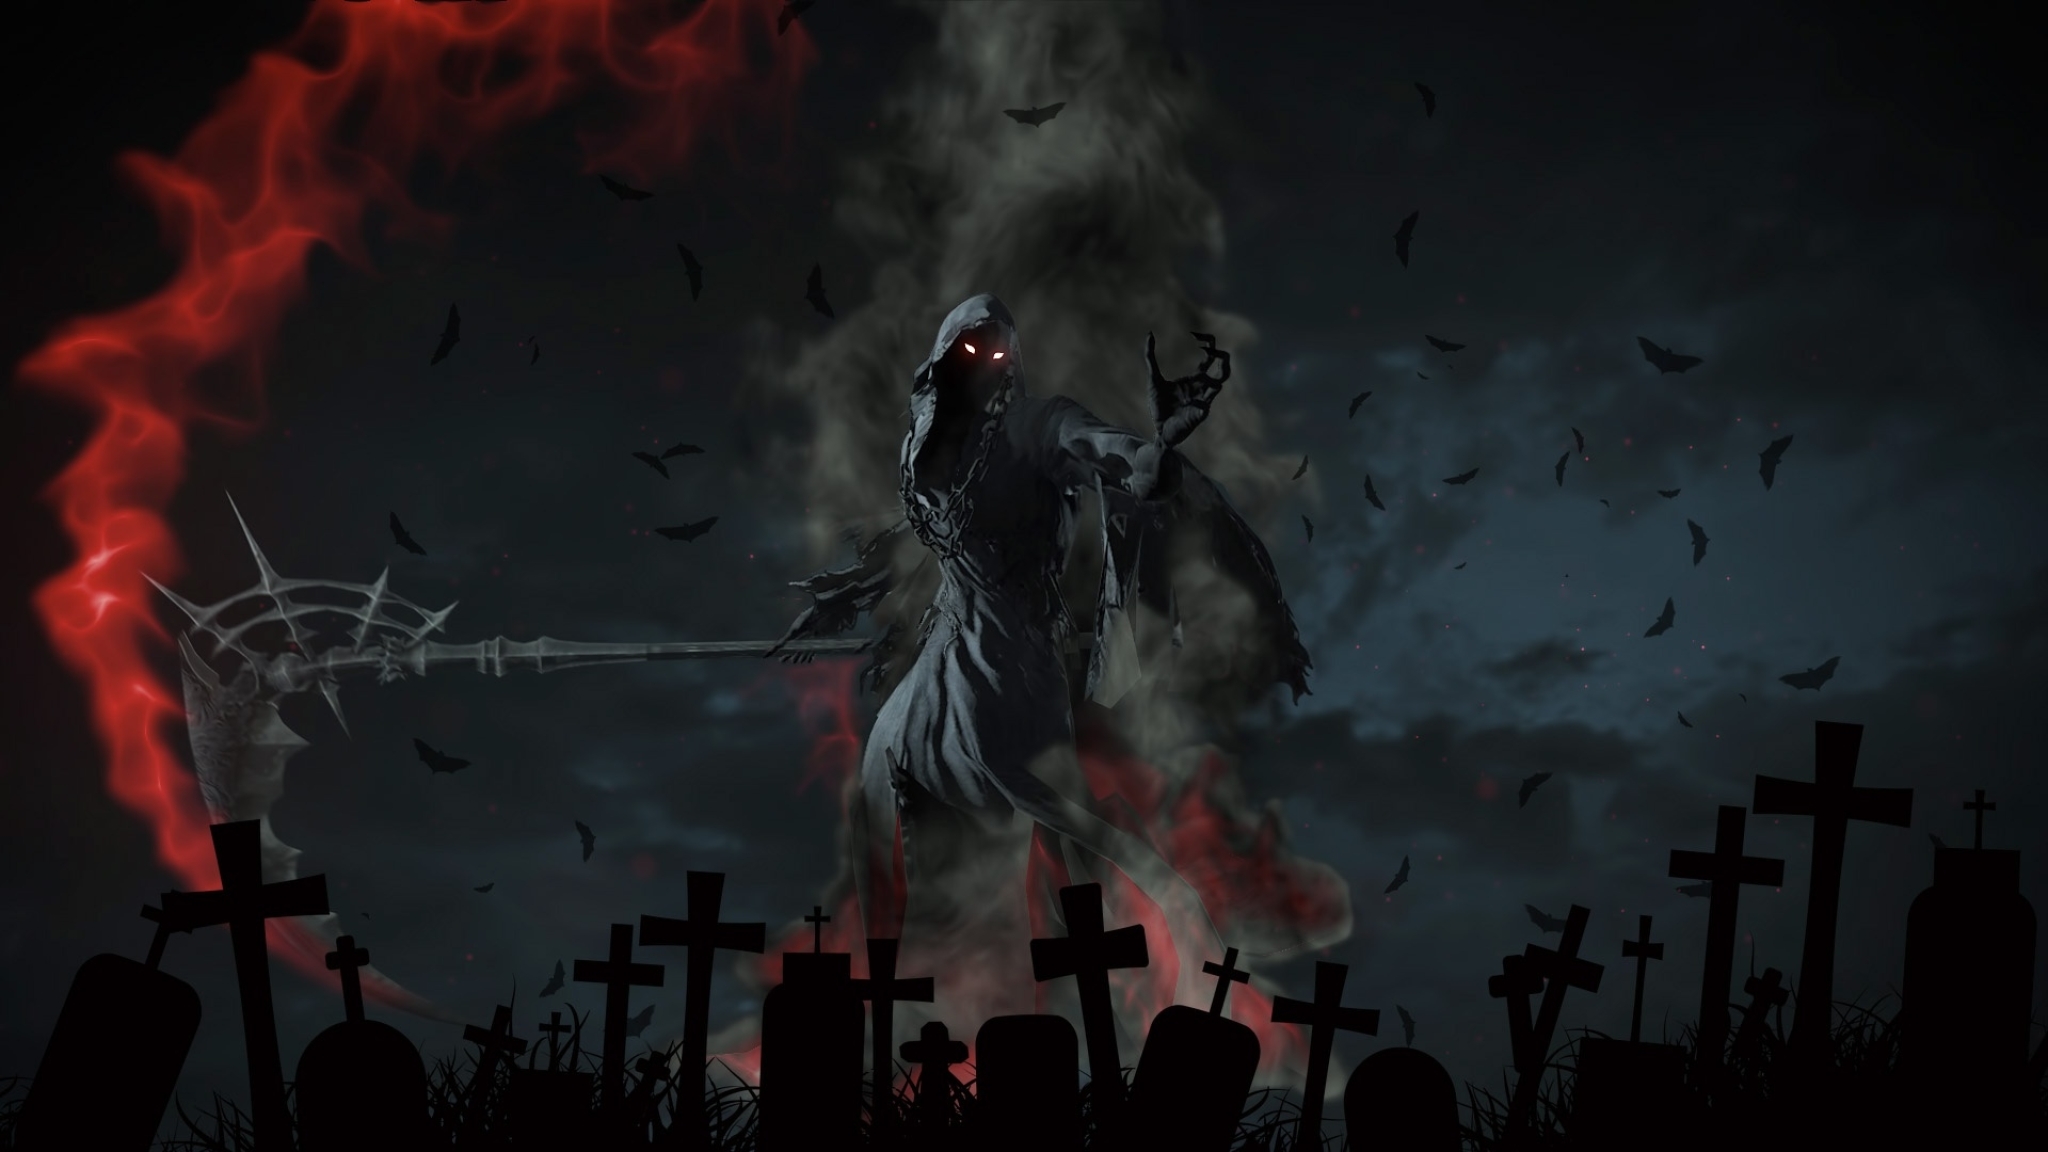 awesome wallpaper the grim reaper